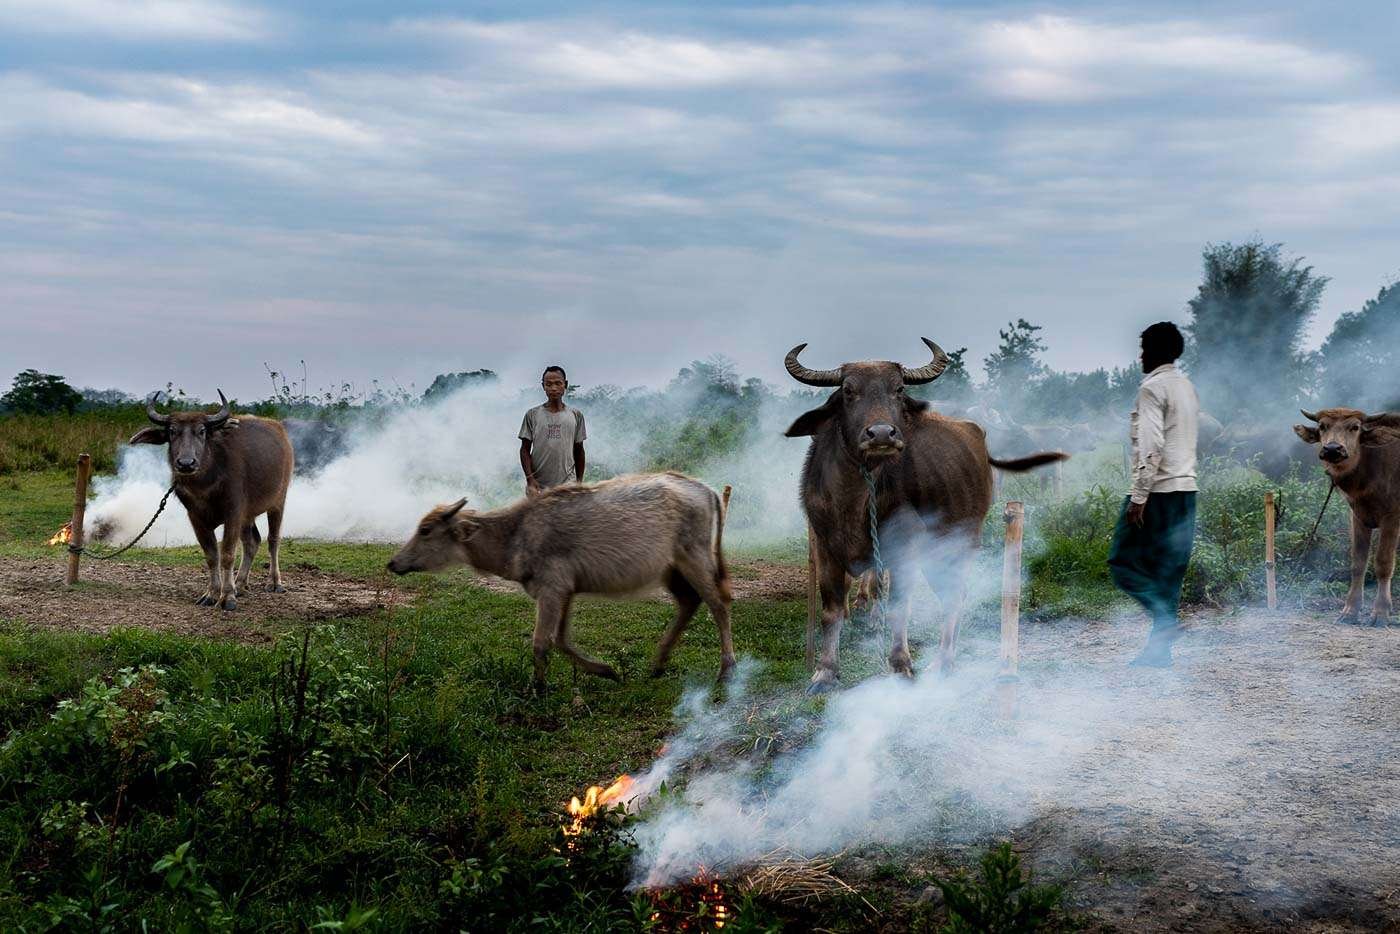 The herdsmen light fires to create smoky protection for their animals.